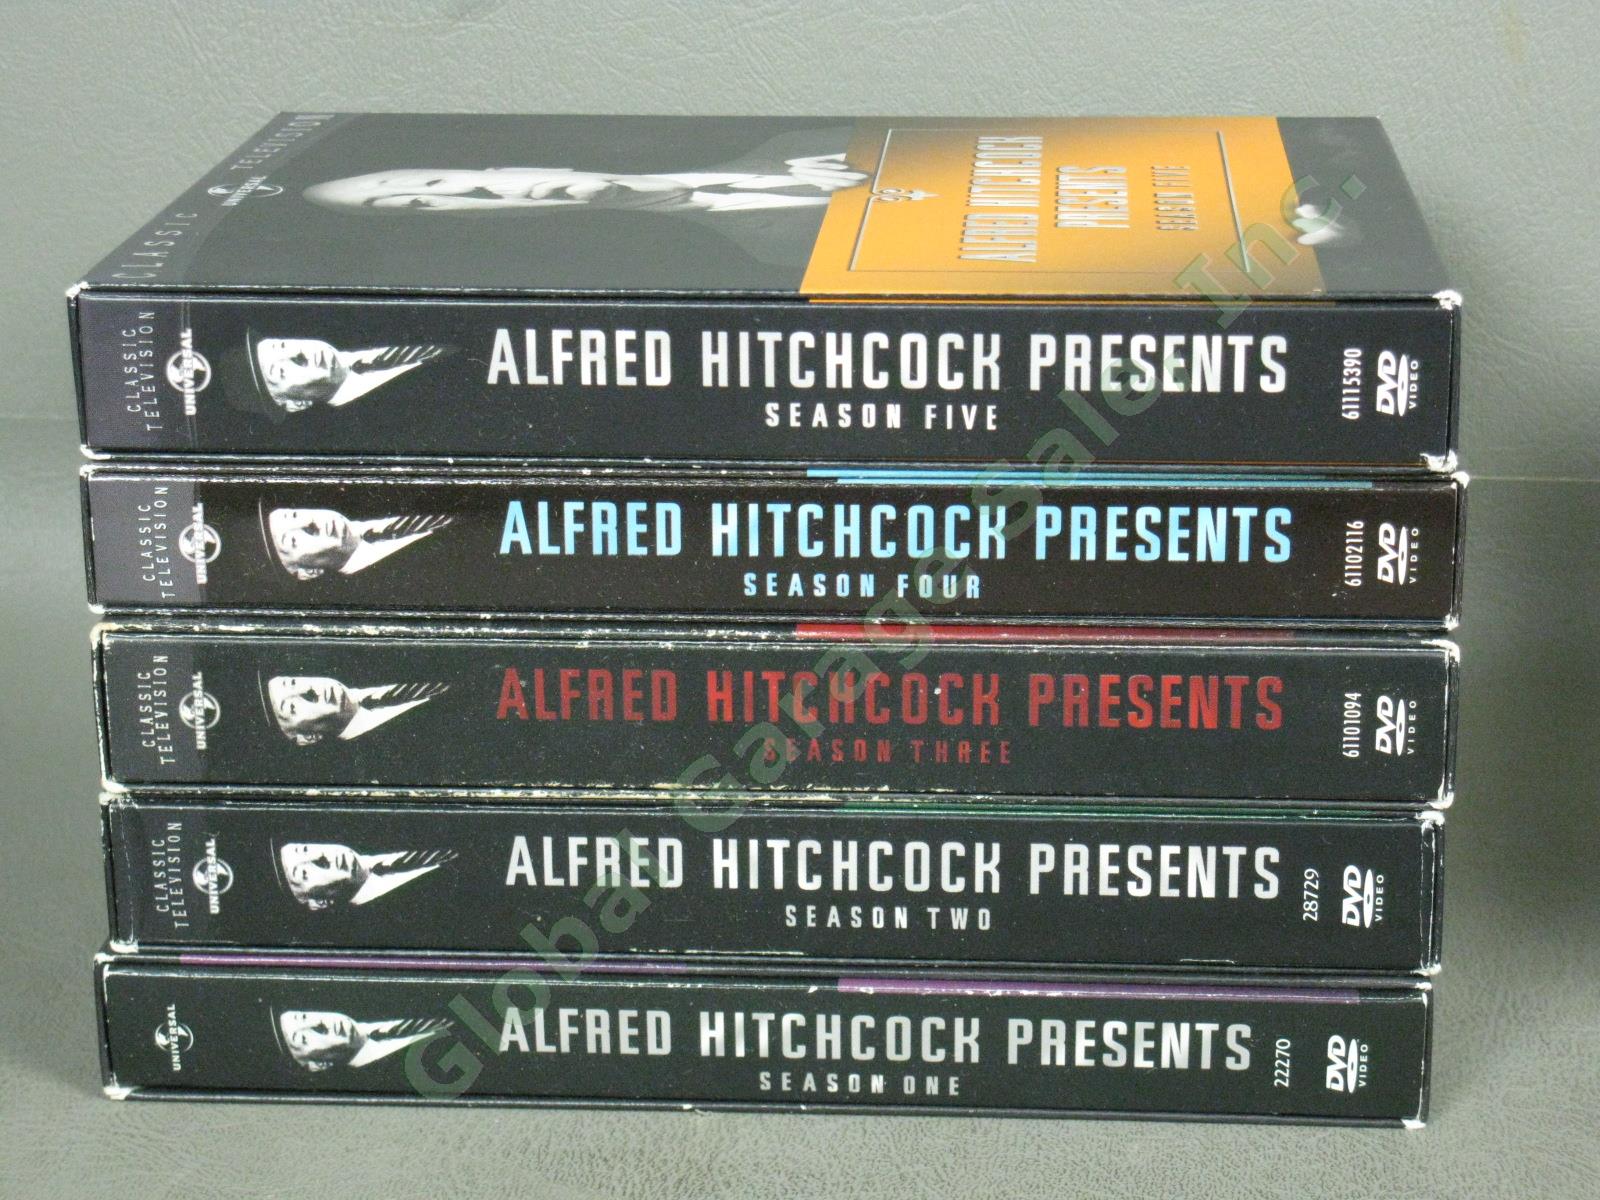 HUGE Alfred Hitchcock DVD Lot Masterpiece Collection Presents Seasons 1-5 Movies 4